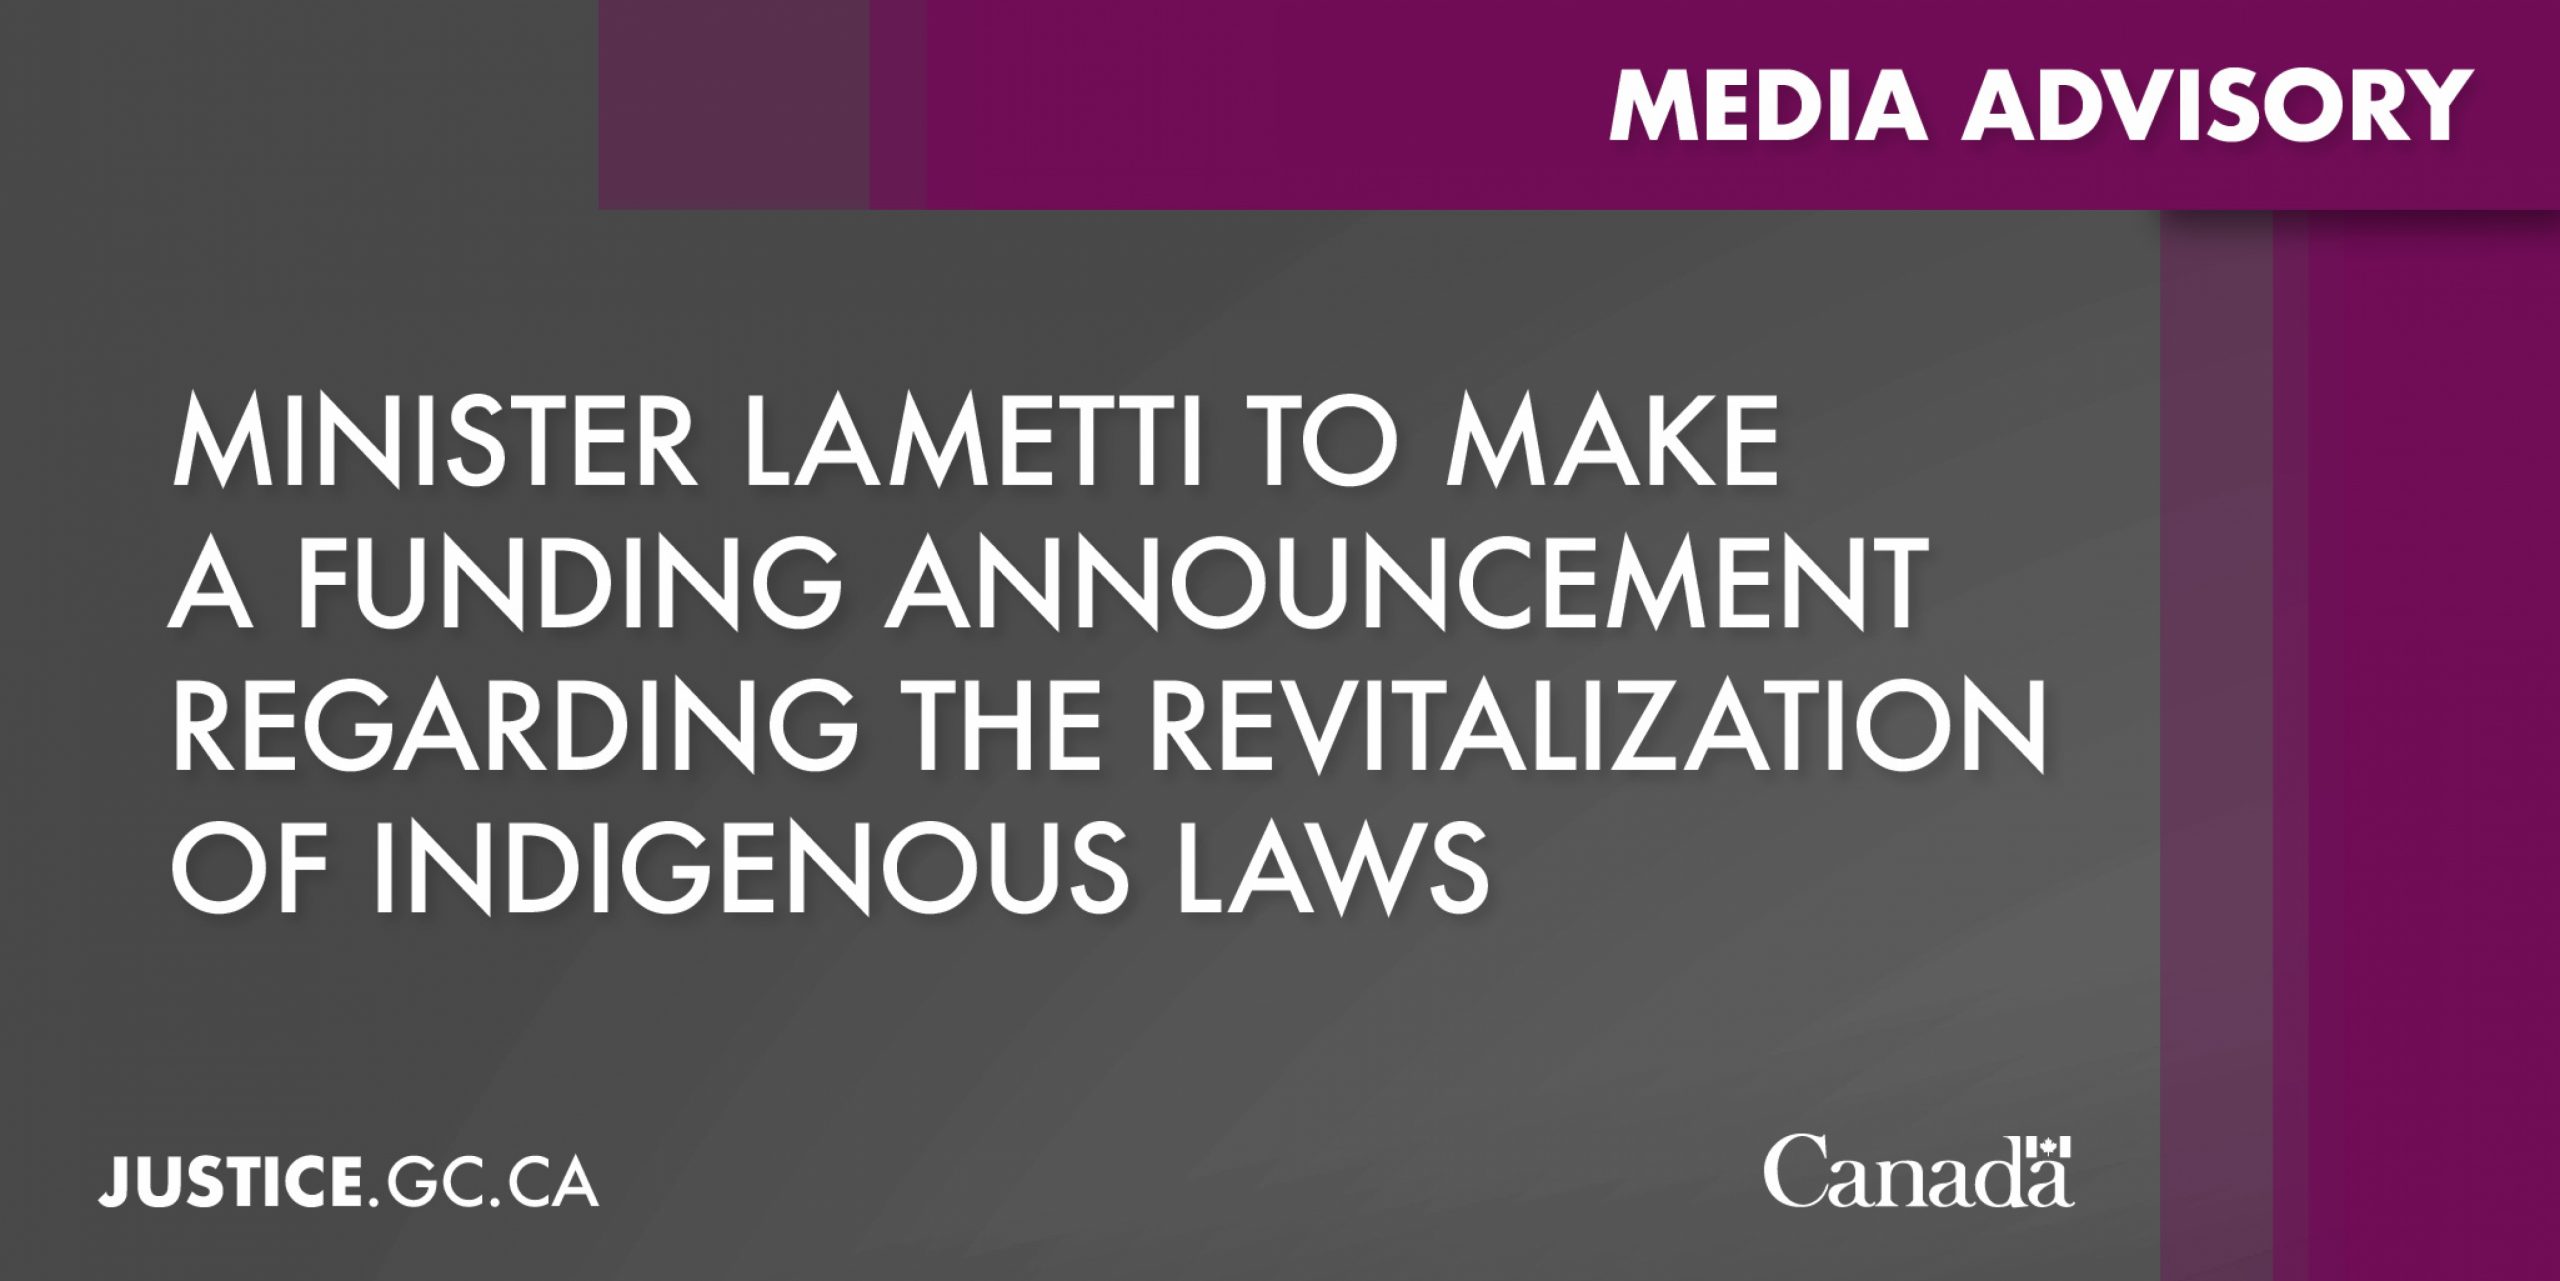 Minister Lametti to make a funding announcement regarding the revitalization of Indigenous laws